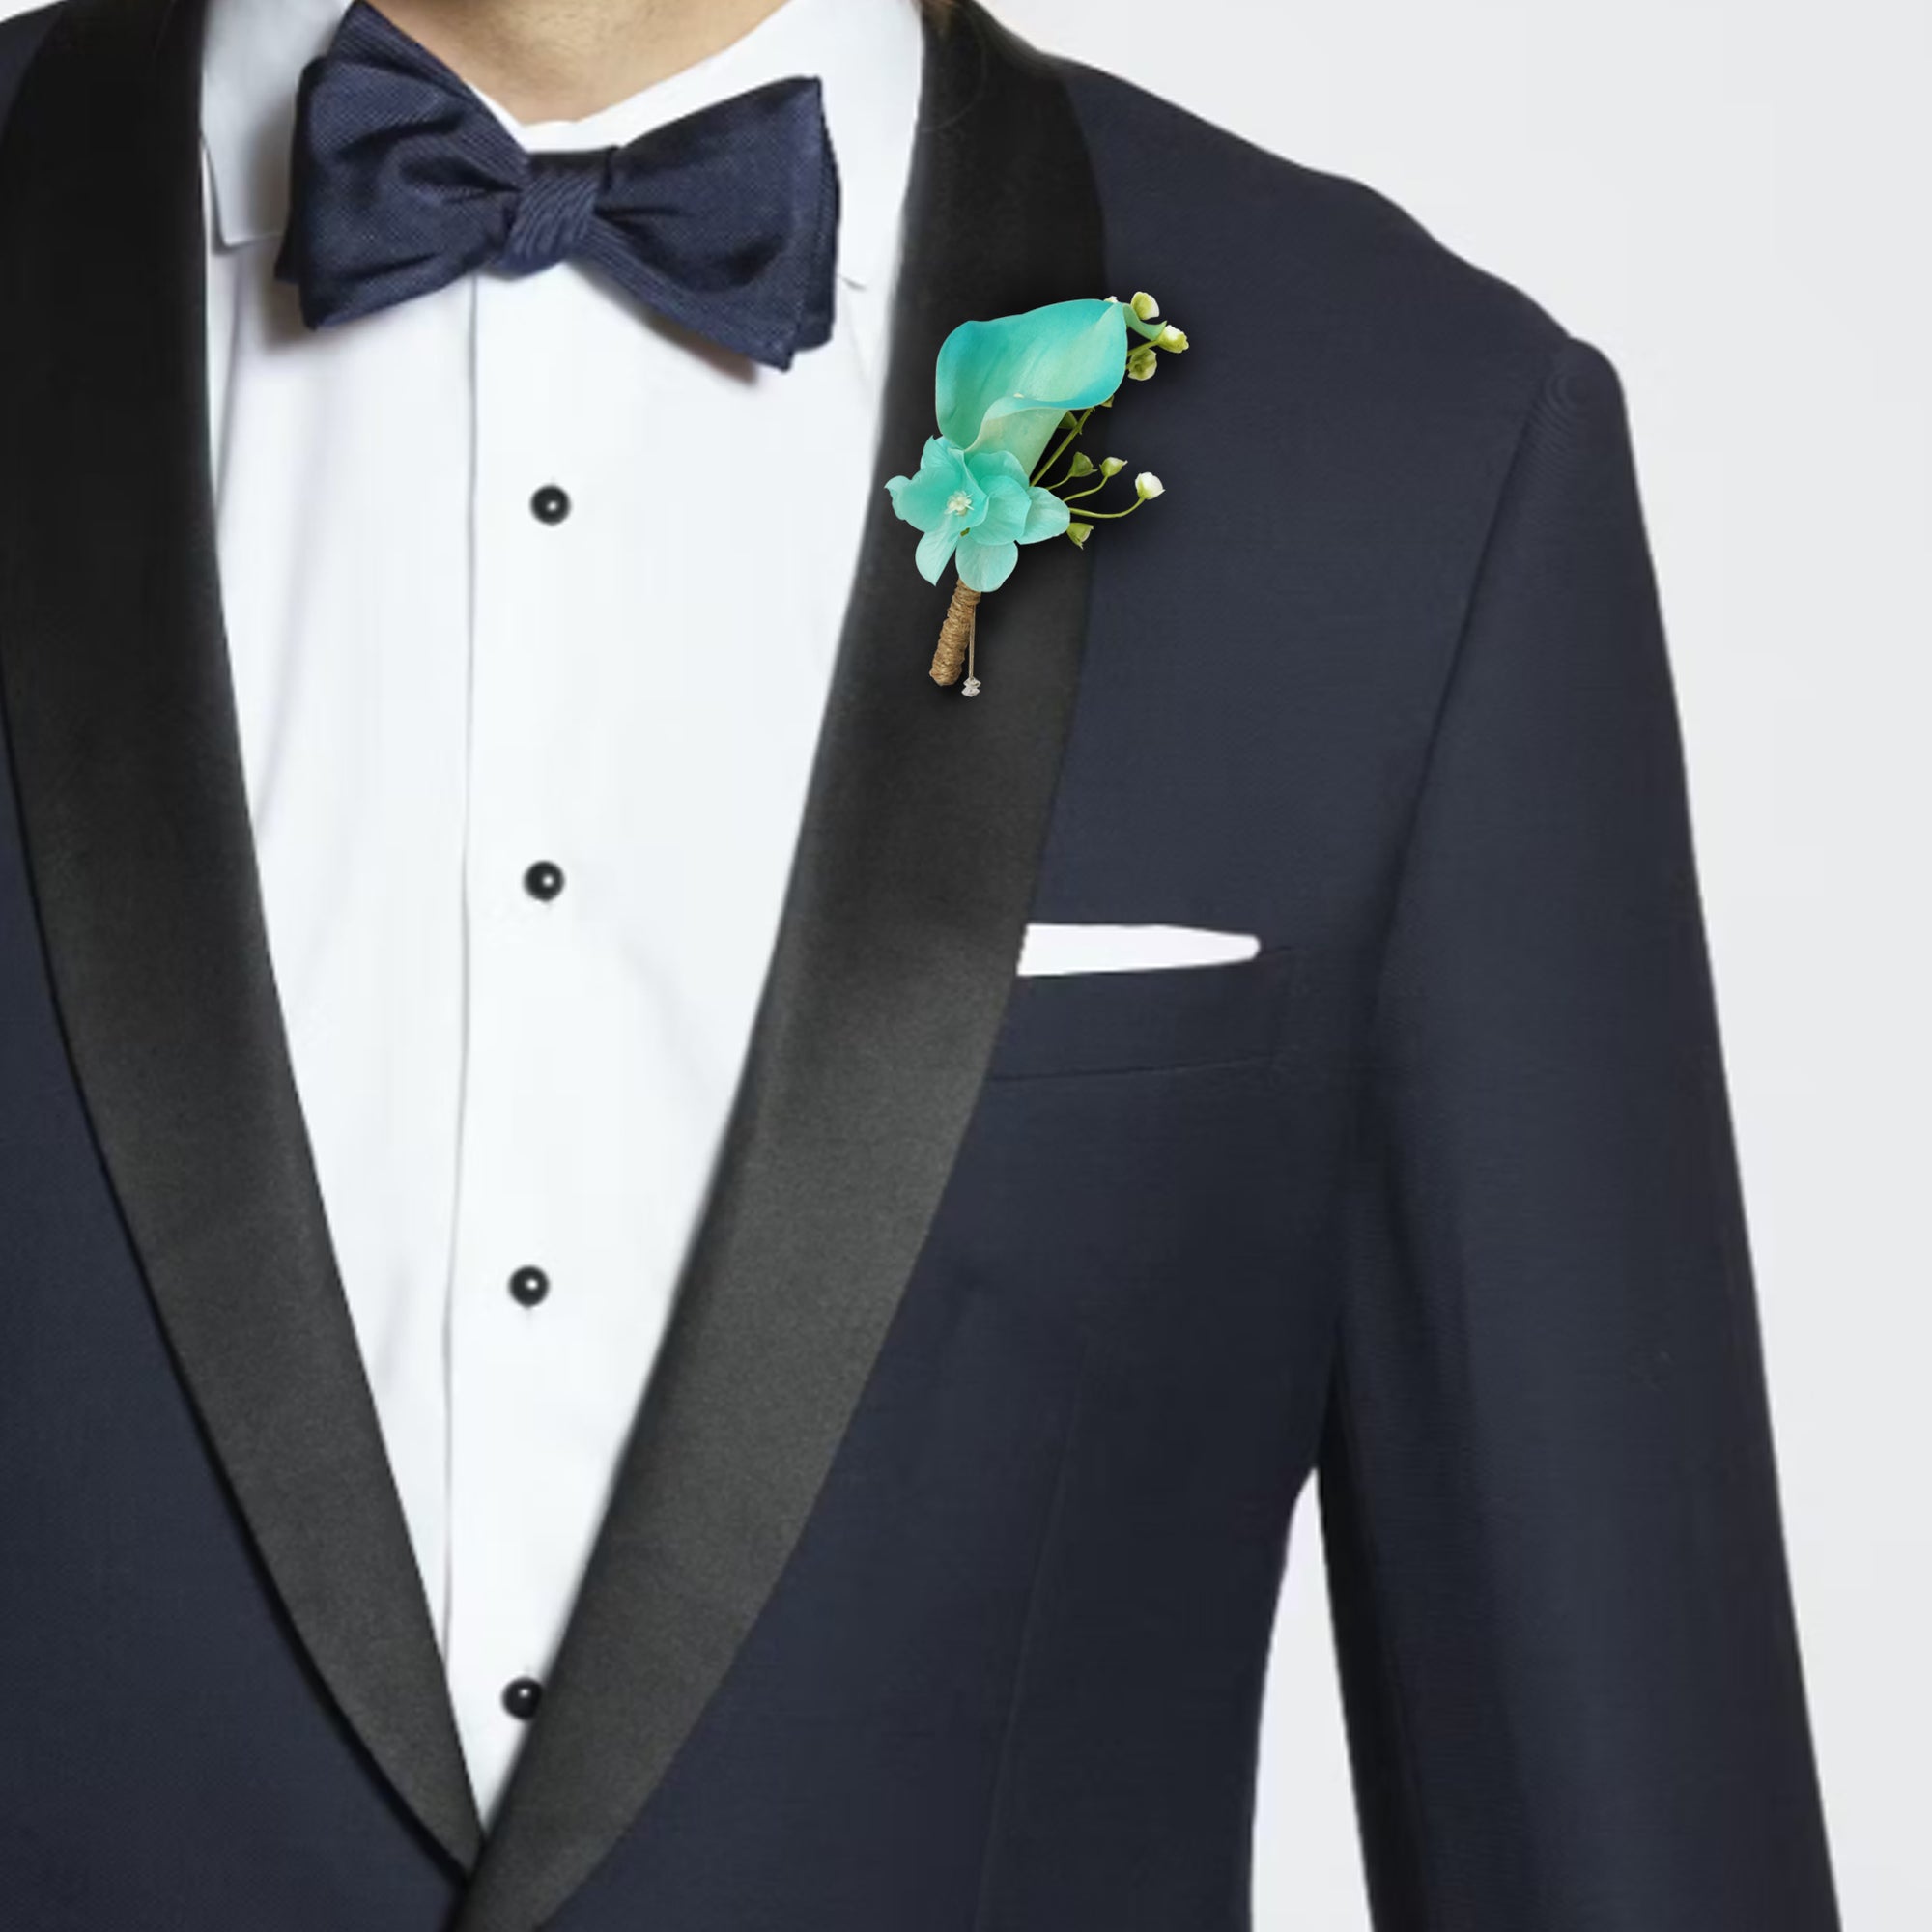 Wedding Boutonniere Pool Blue for Groom Best Man